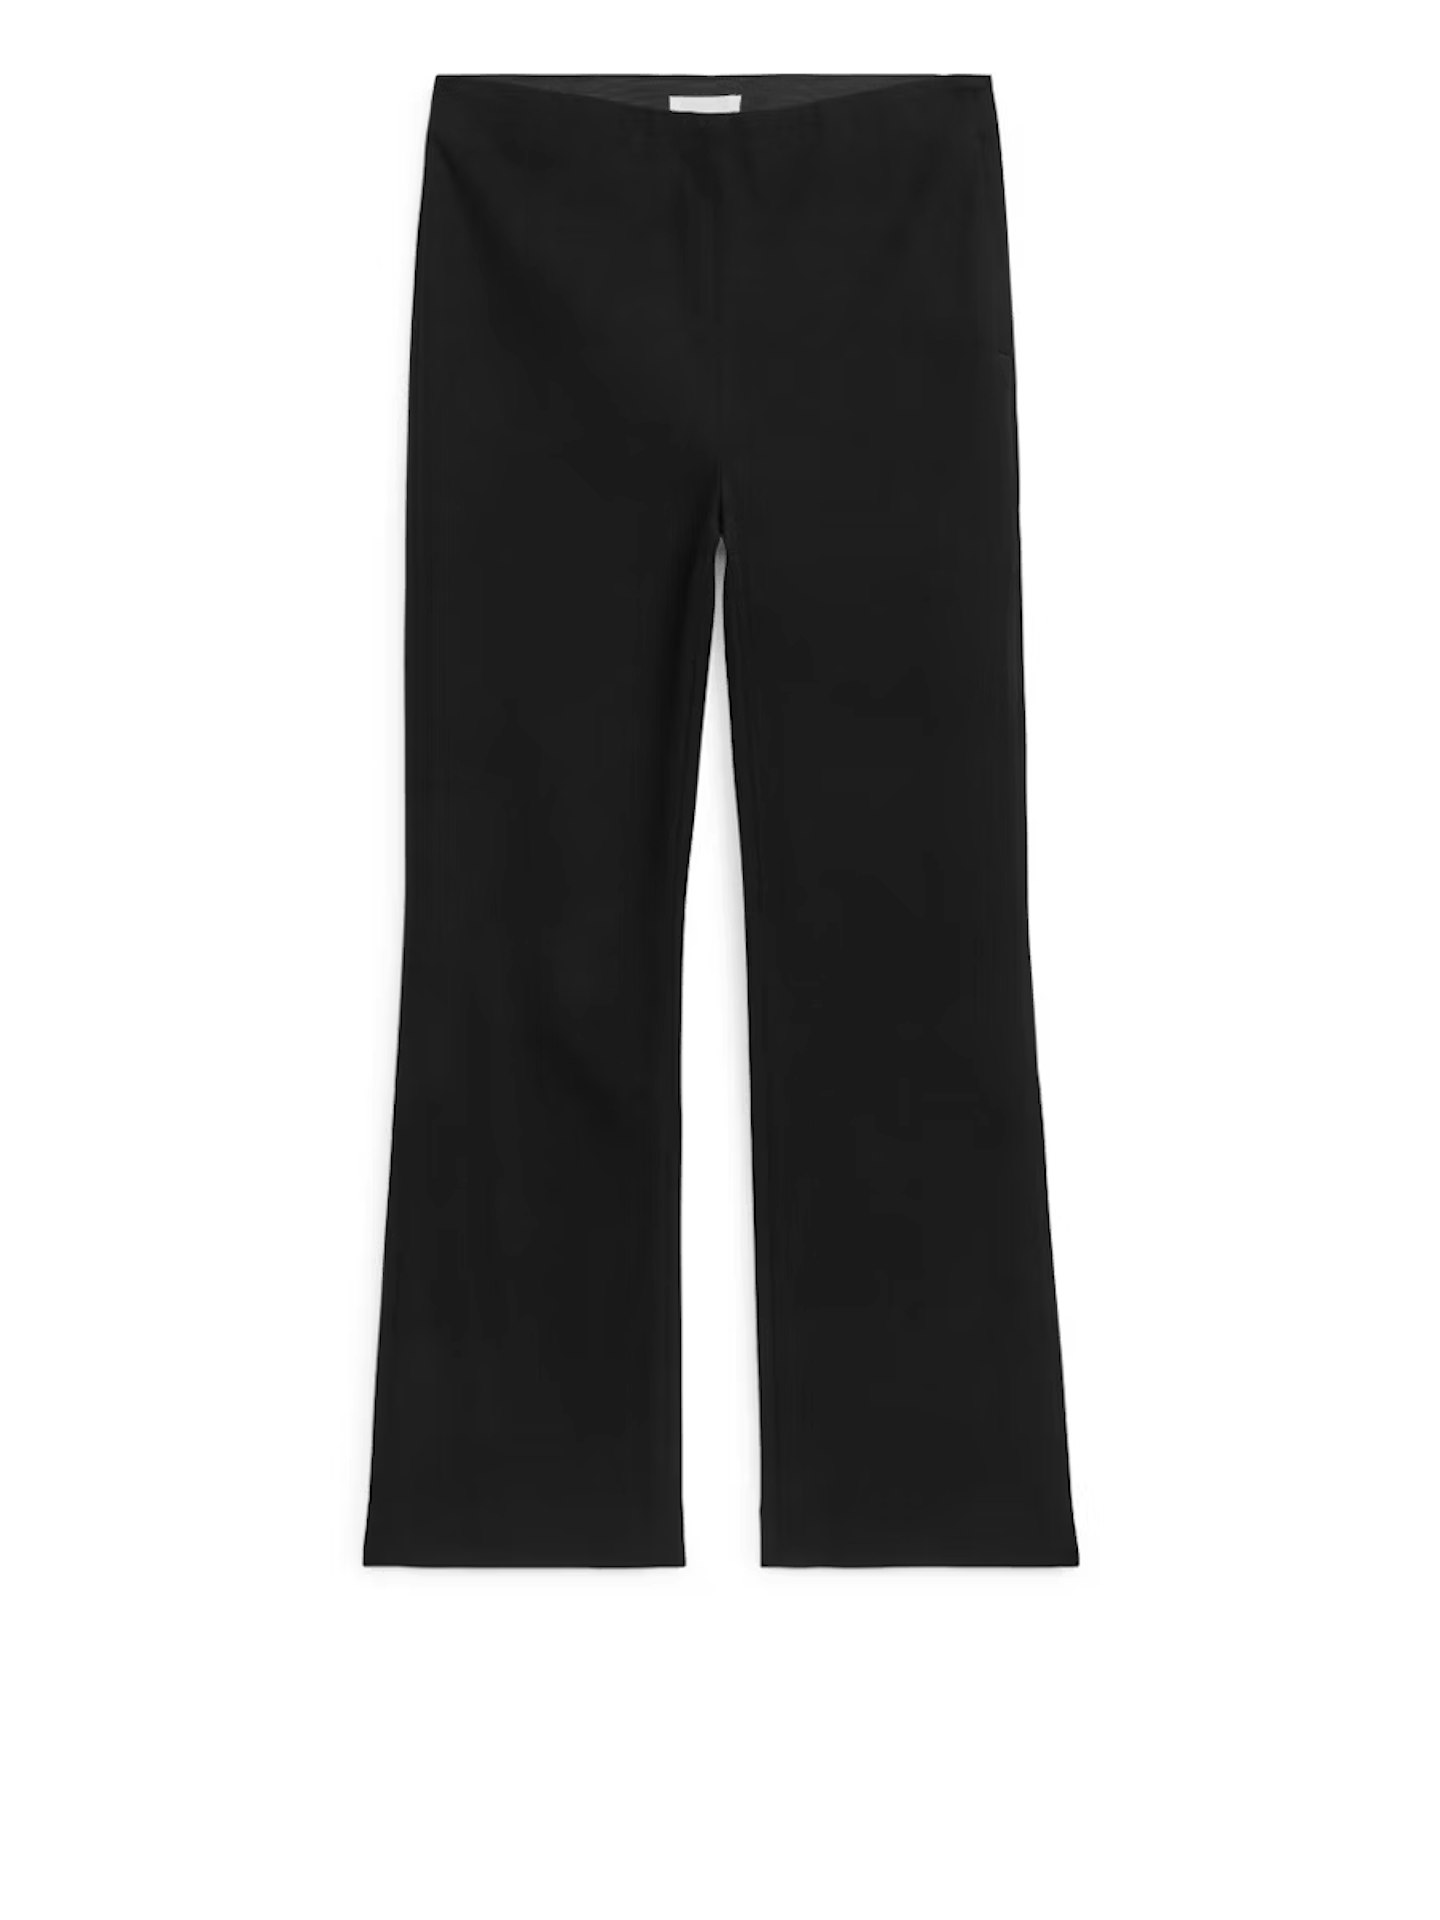 Arket, Cropped Cotton Stretch Trousers